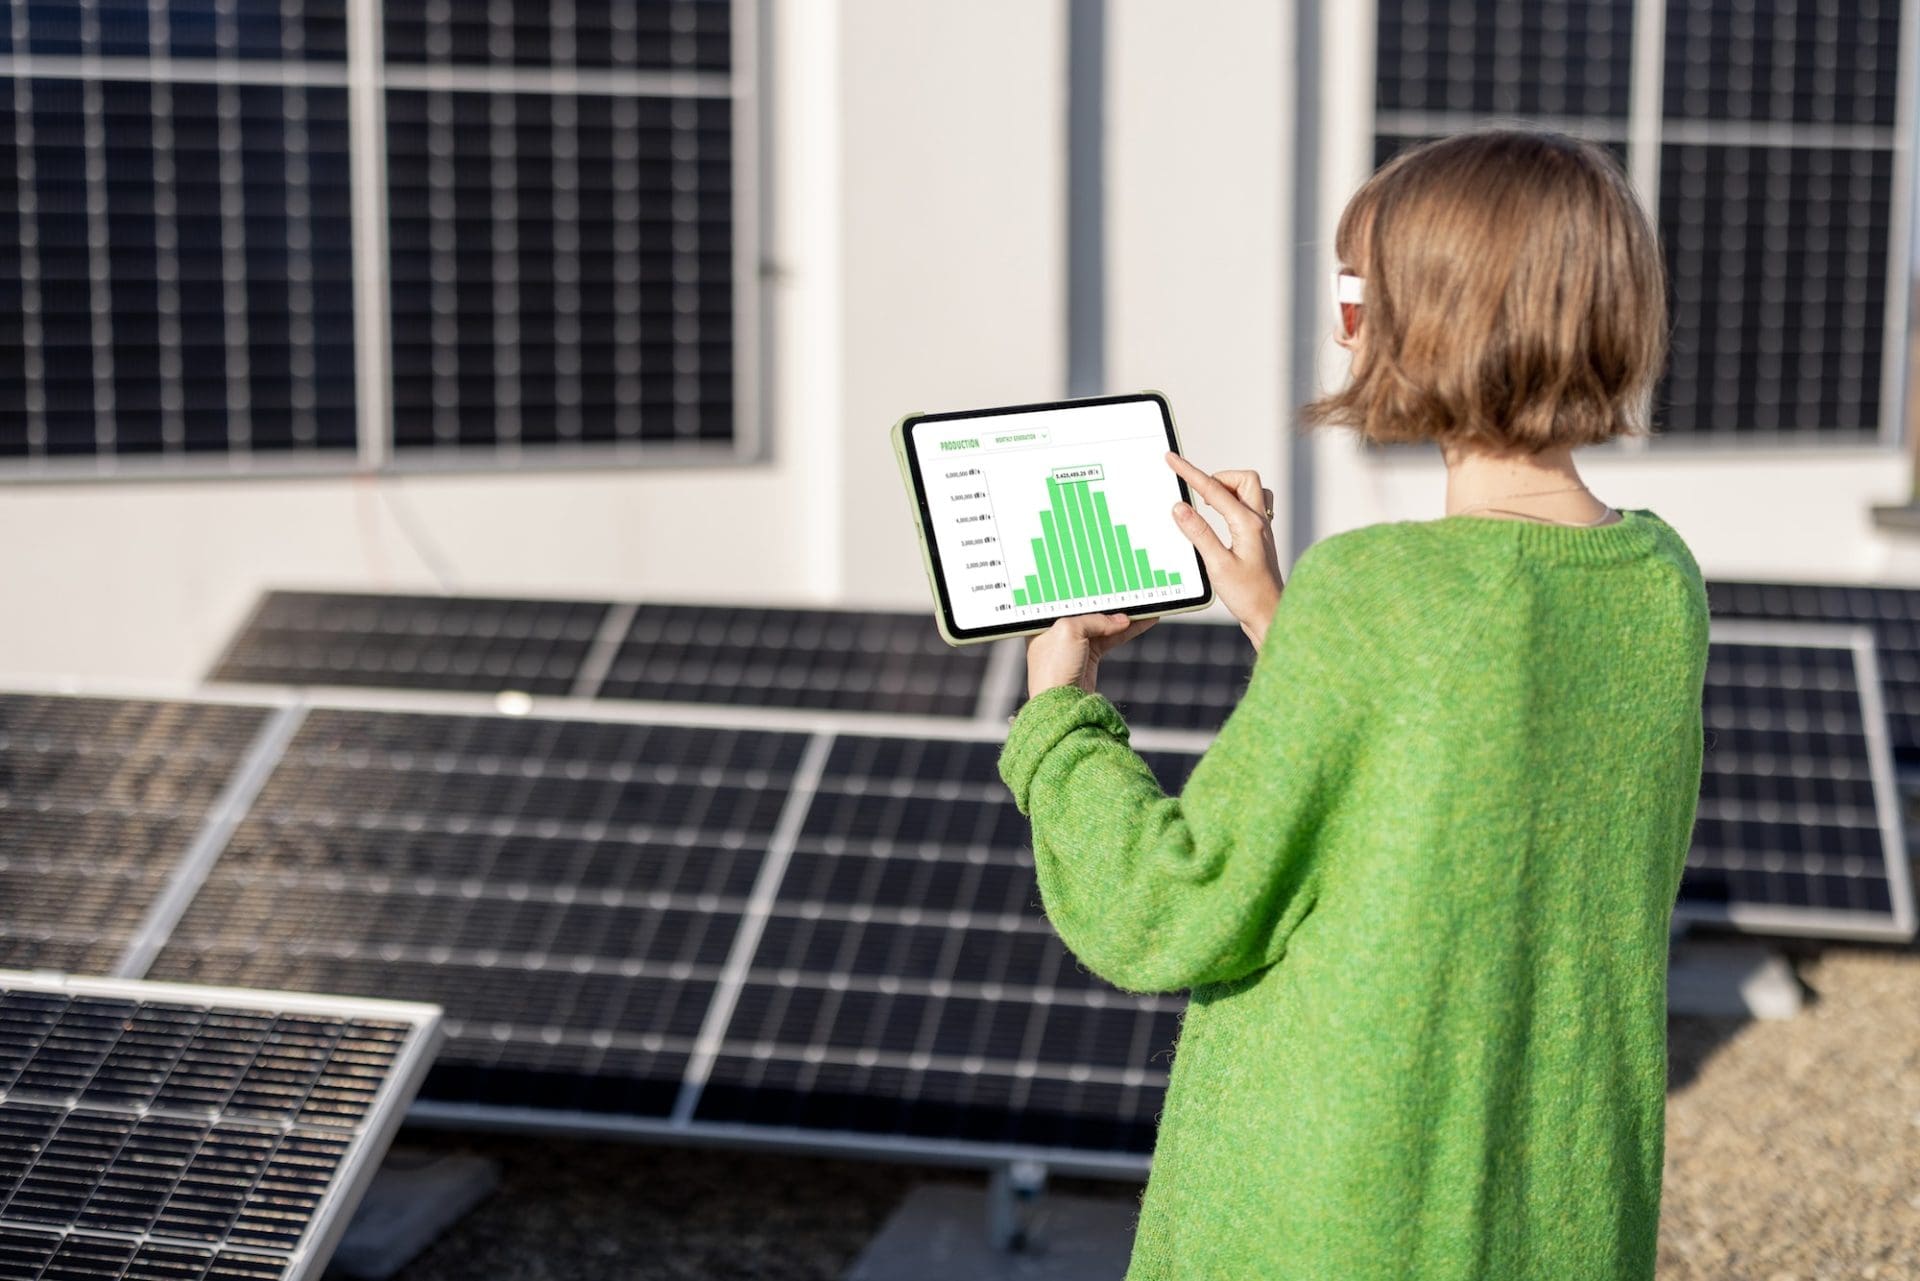 Woman monitors energy production from the solar power plant with a digital tablet